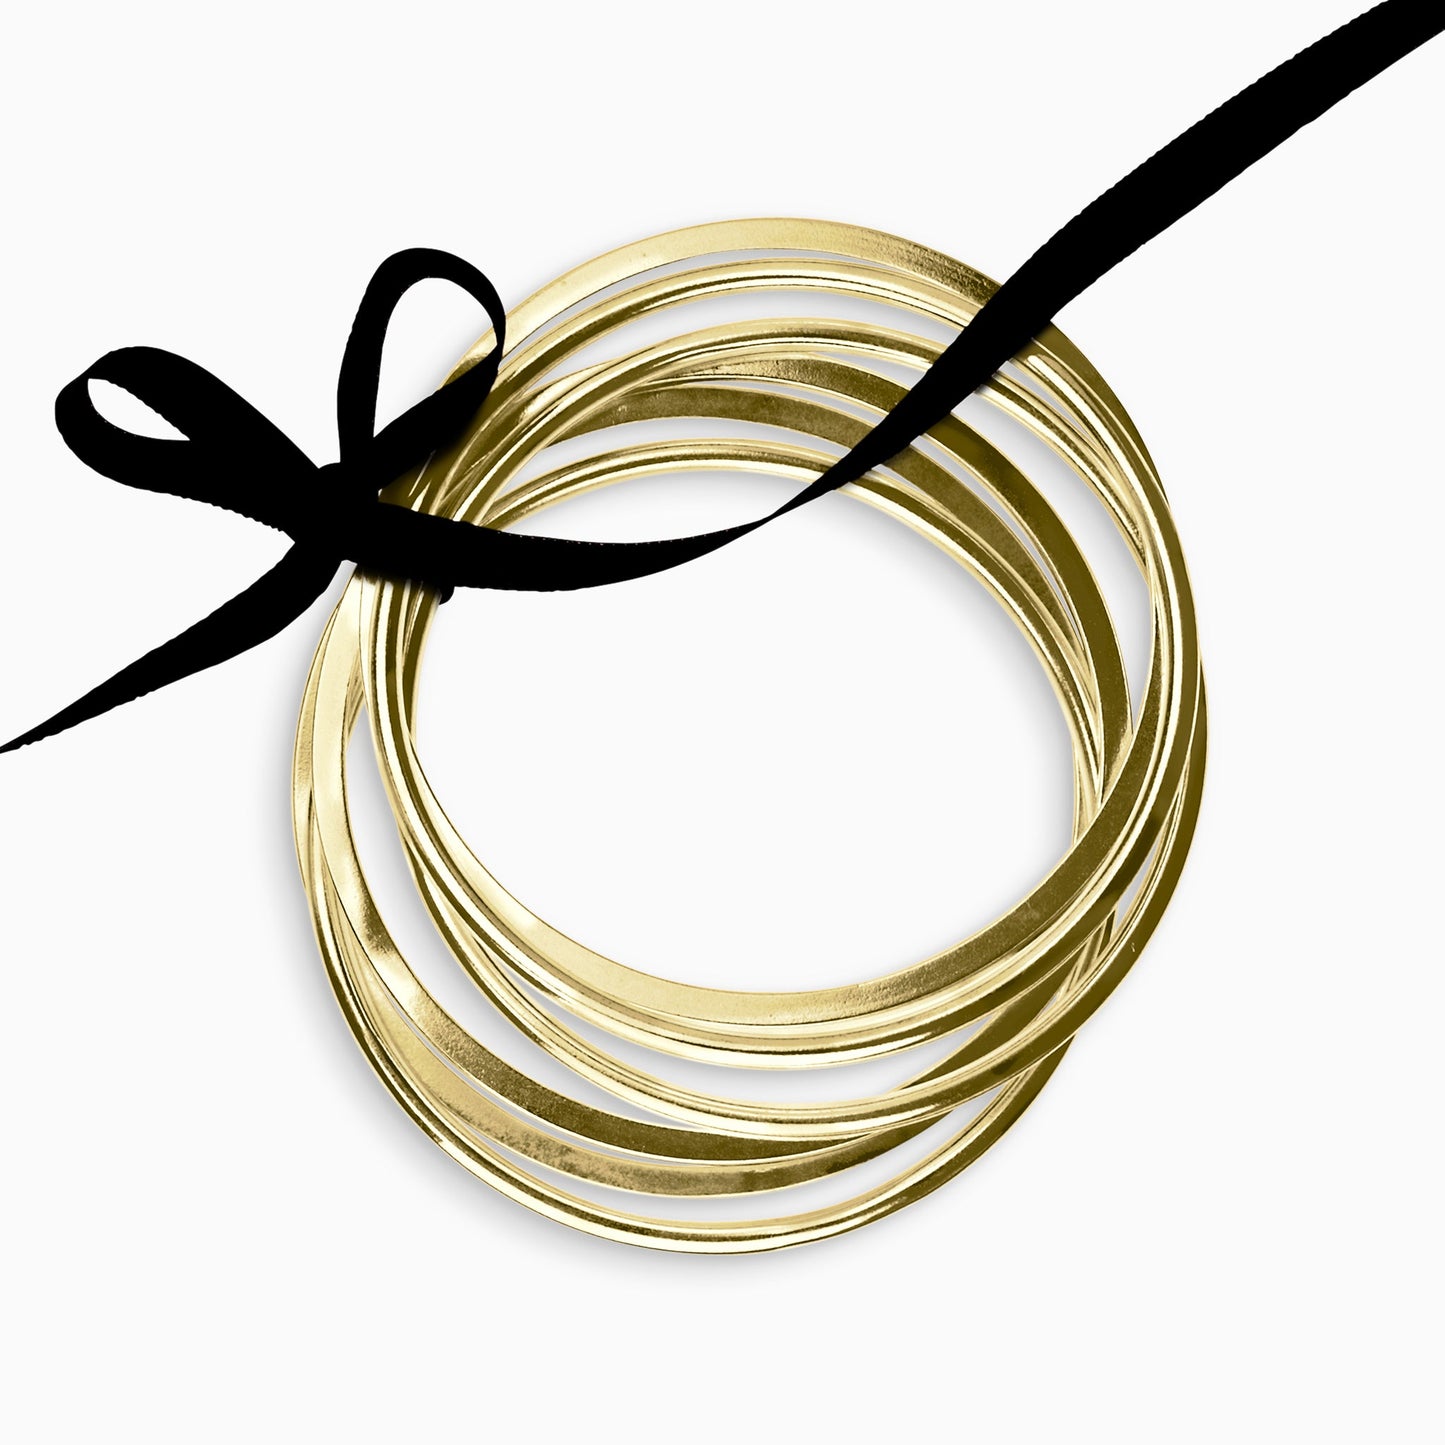 A set of 6 18ct Fairtrade yellow gold bangles of 3mm wire , 3 x round undulating section and 3 x undulating square section. 63mm inside diameter.